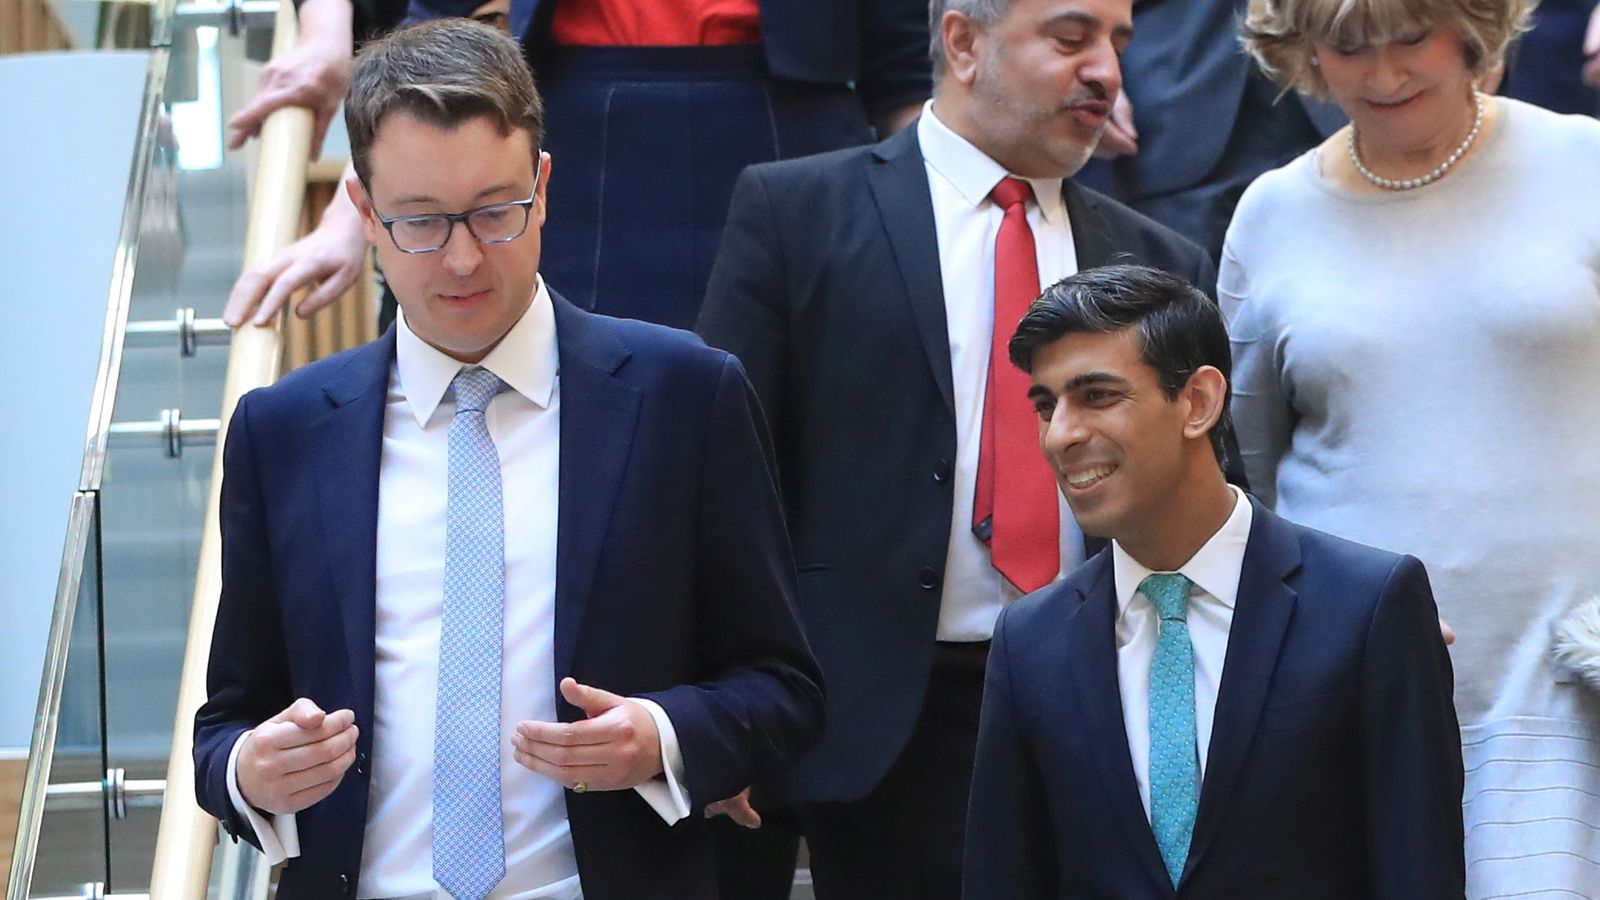 Tory infighting breaks out after former minister calls on Sunak to go with Labour saying it's 'like an episode of The Traitors'